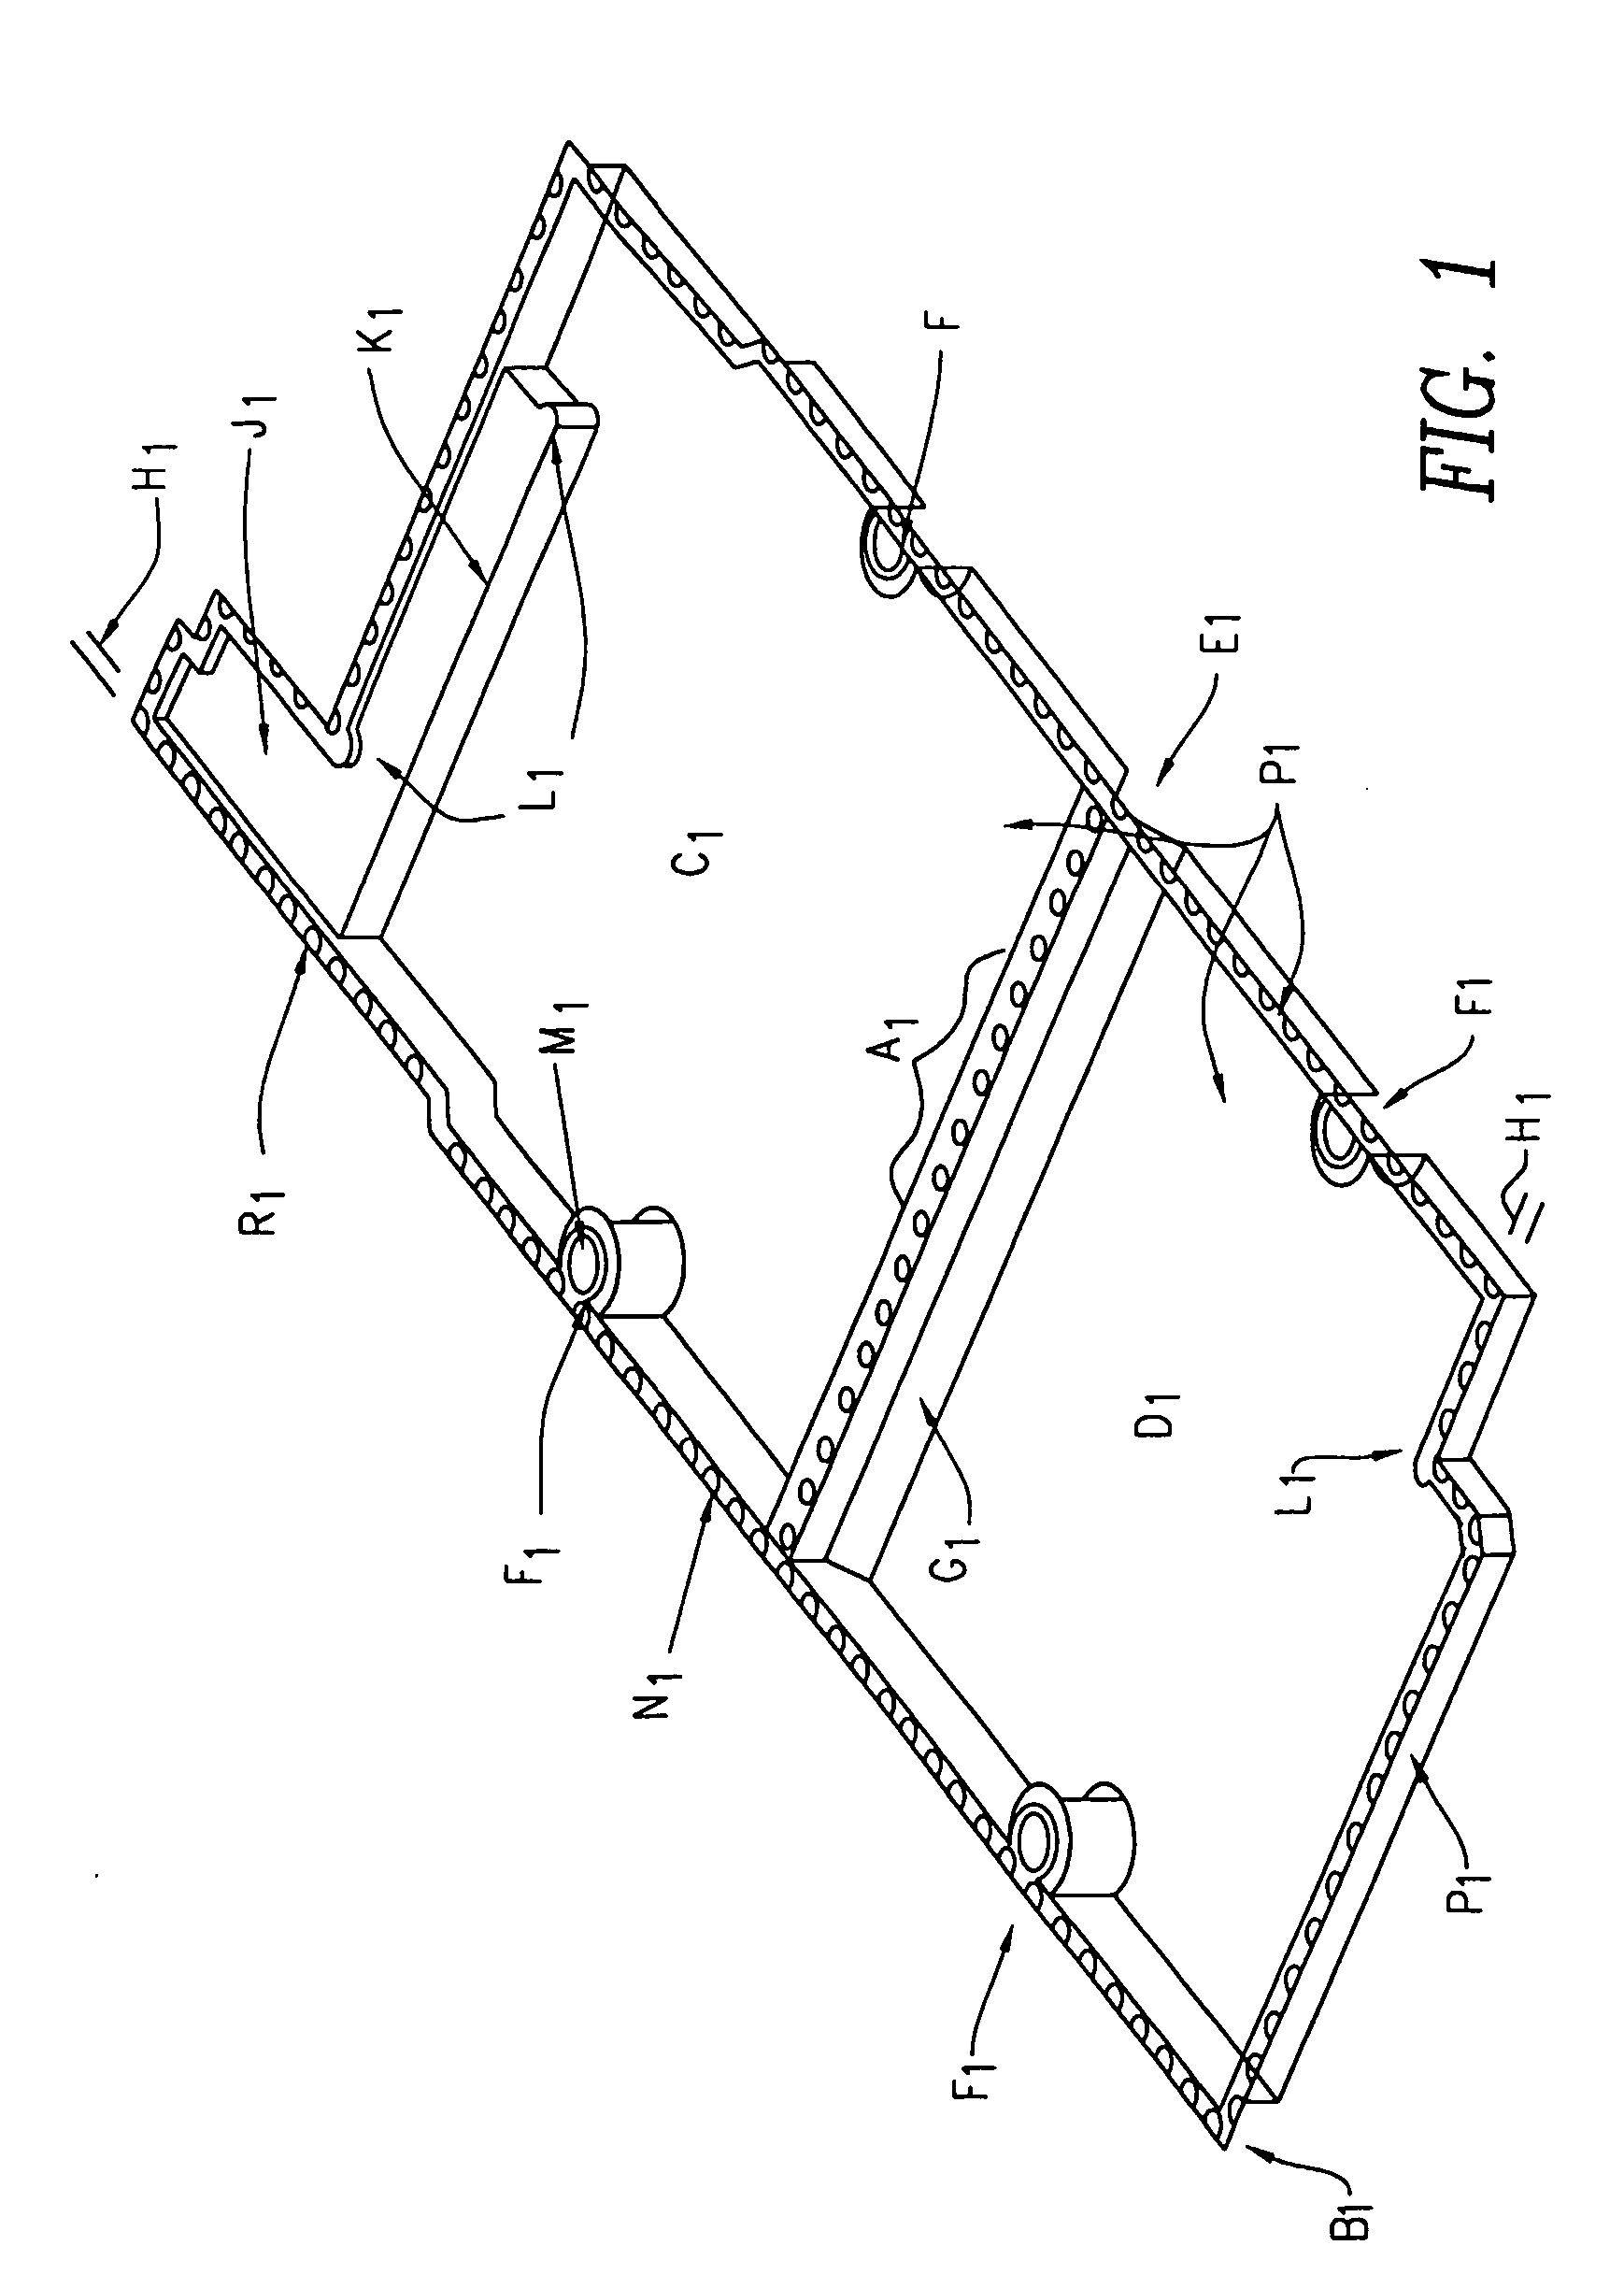 Conforming shielded form for electronic component assemblies and methods for making and using same